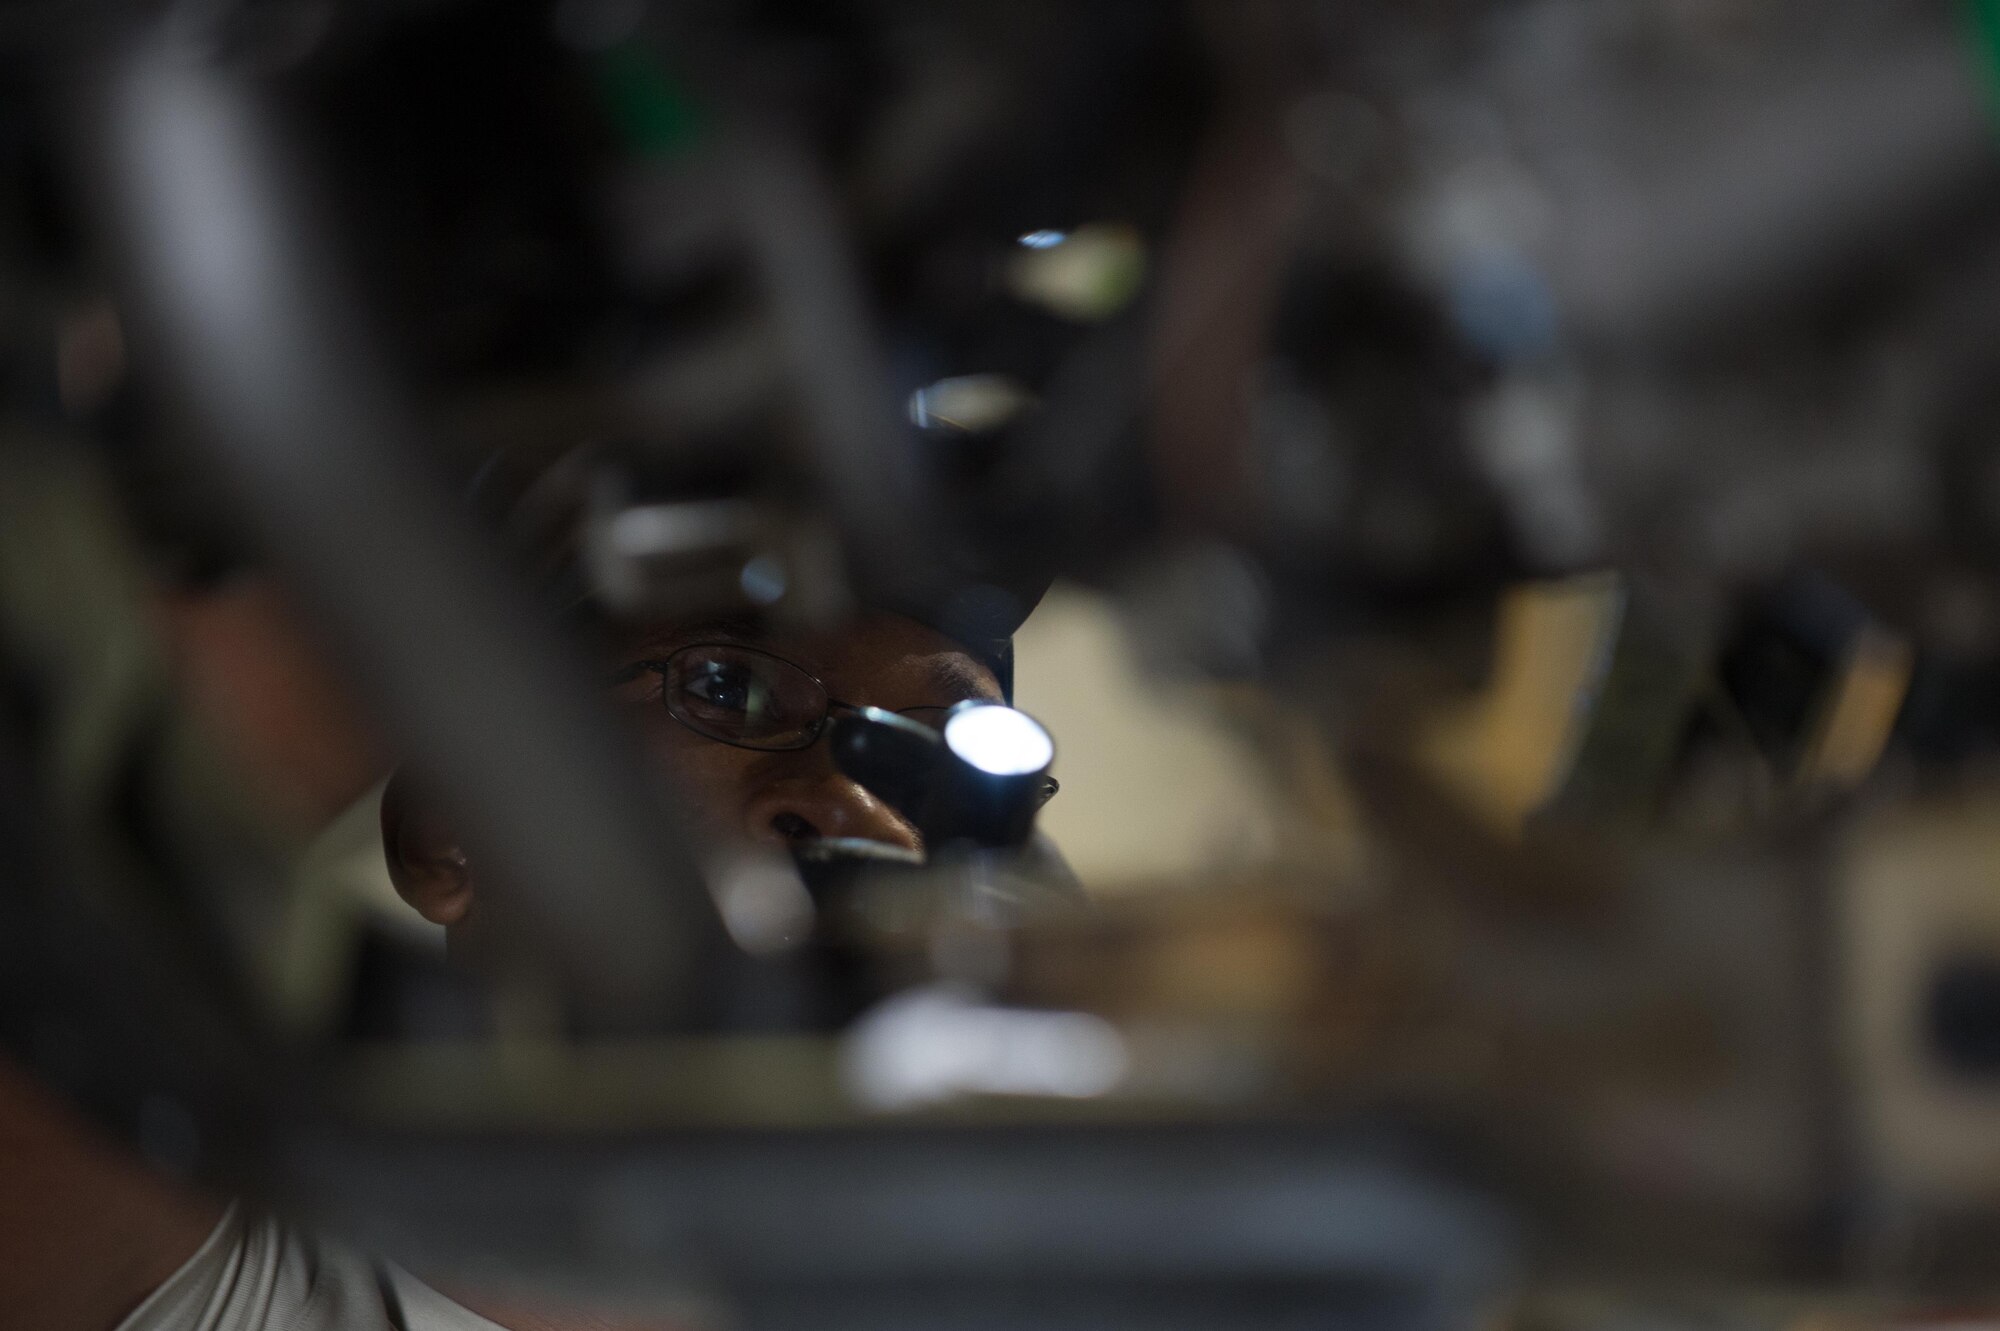 U.S. Air Force Staff Sgt. Donterrio Erby, 455th Expeditionary Maintenance Squadron, performs a 400-hour engine inspection on an F-16 Fighting Falcon aircraft at Bagram Airfield, Afghanistan, June 9, 2015. The 455th EAMXS ensure Fighting Falcons on Bagram are prepared for flight and return them to a mission-ready state once they land.  (U.S. Air Force photo by Tech. Sgt. Joseph Swafford/Released)